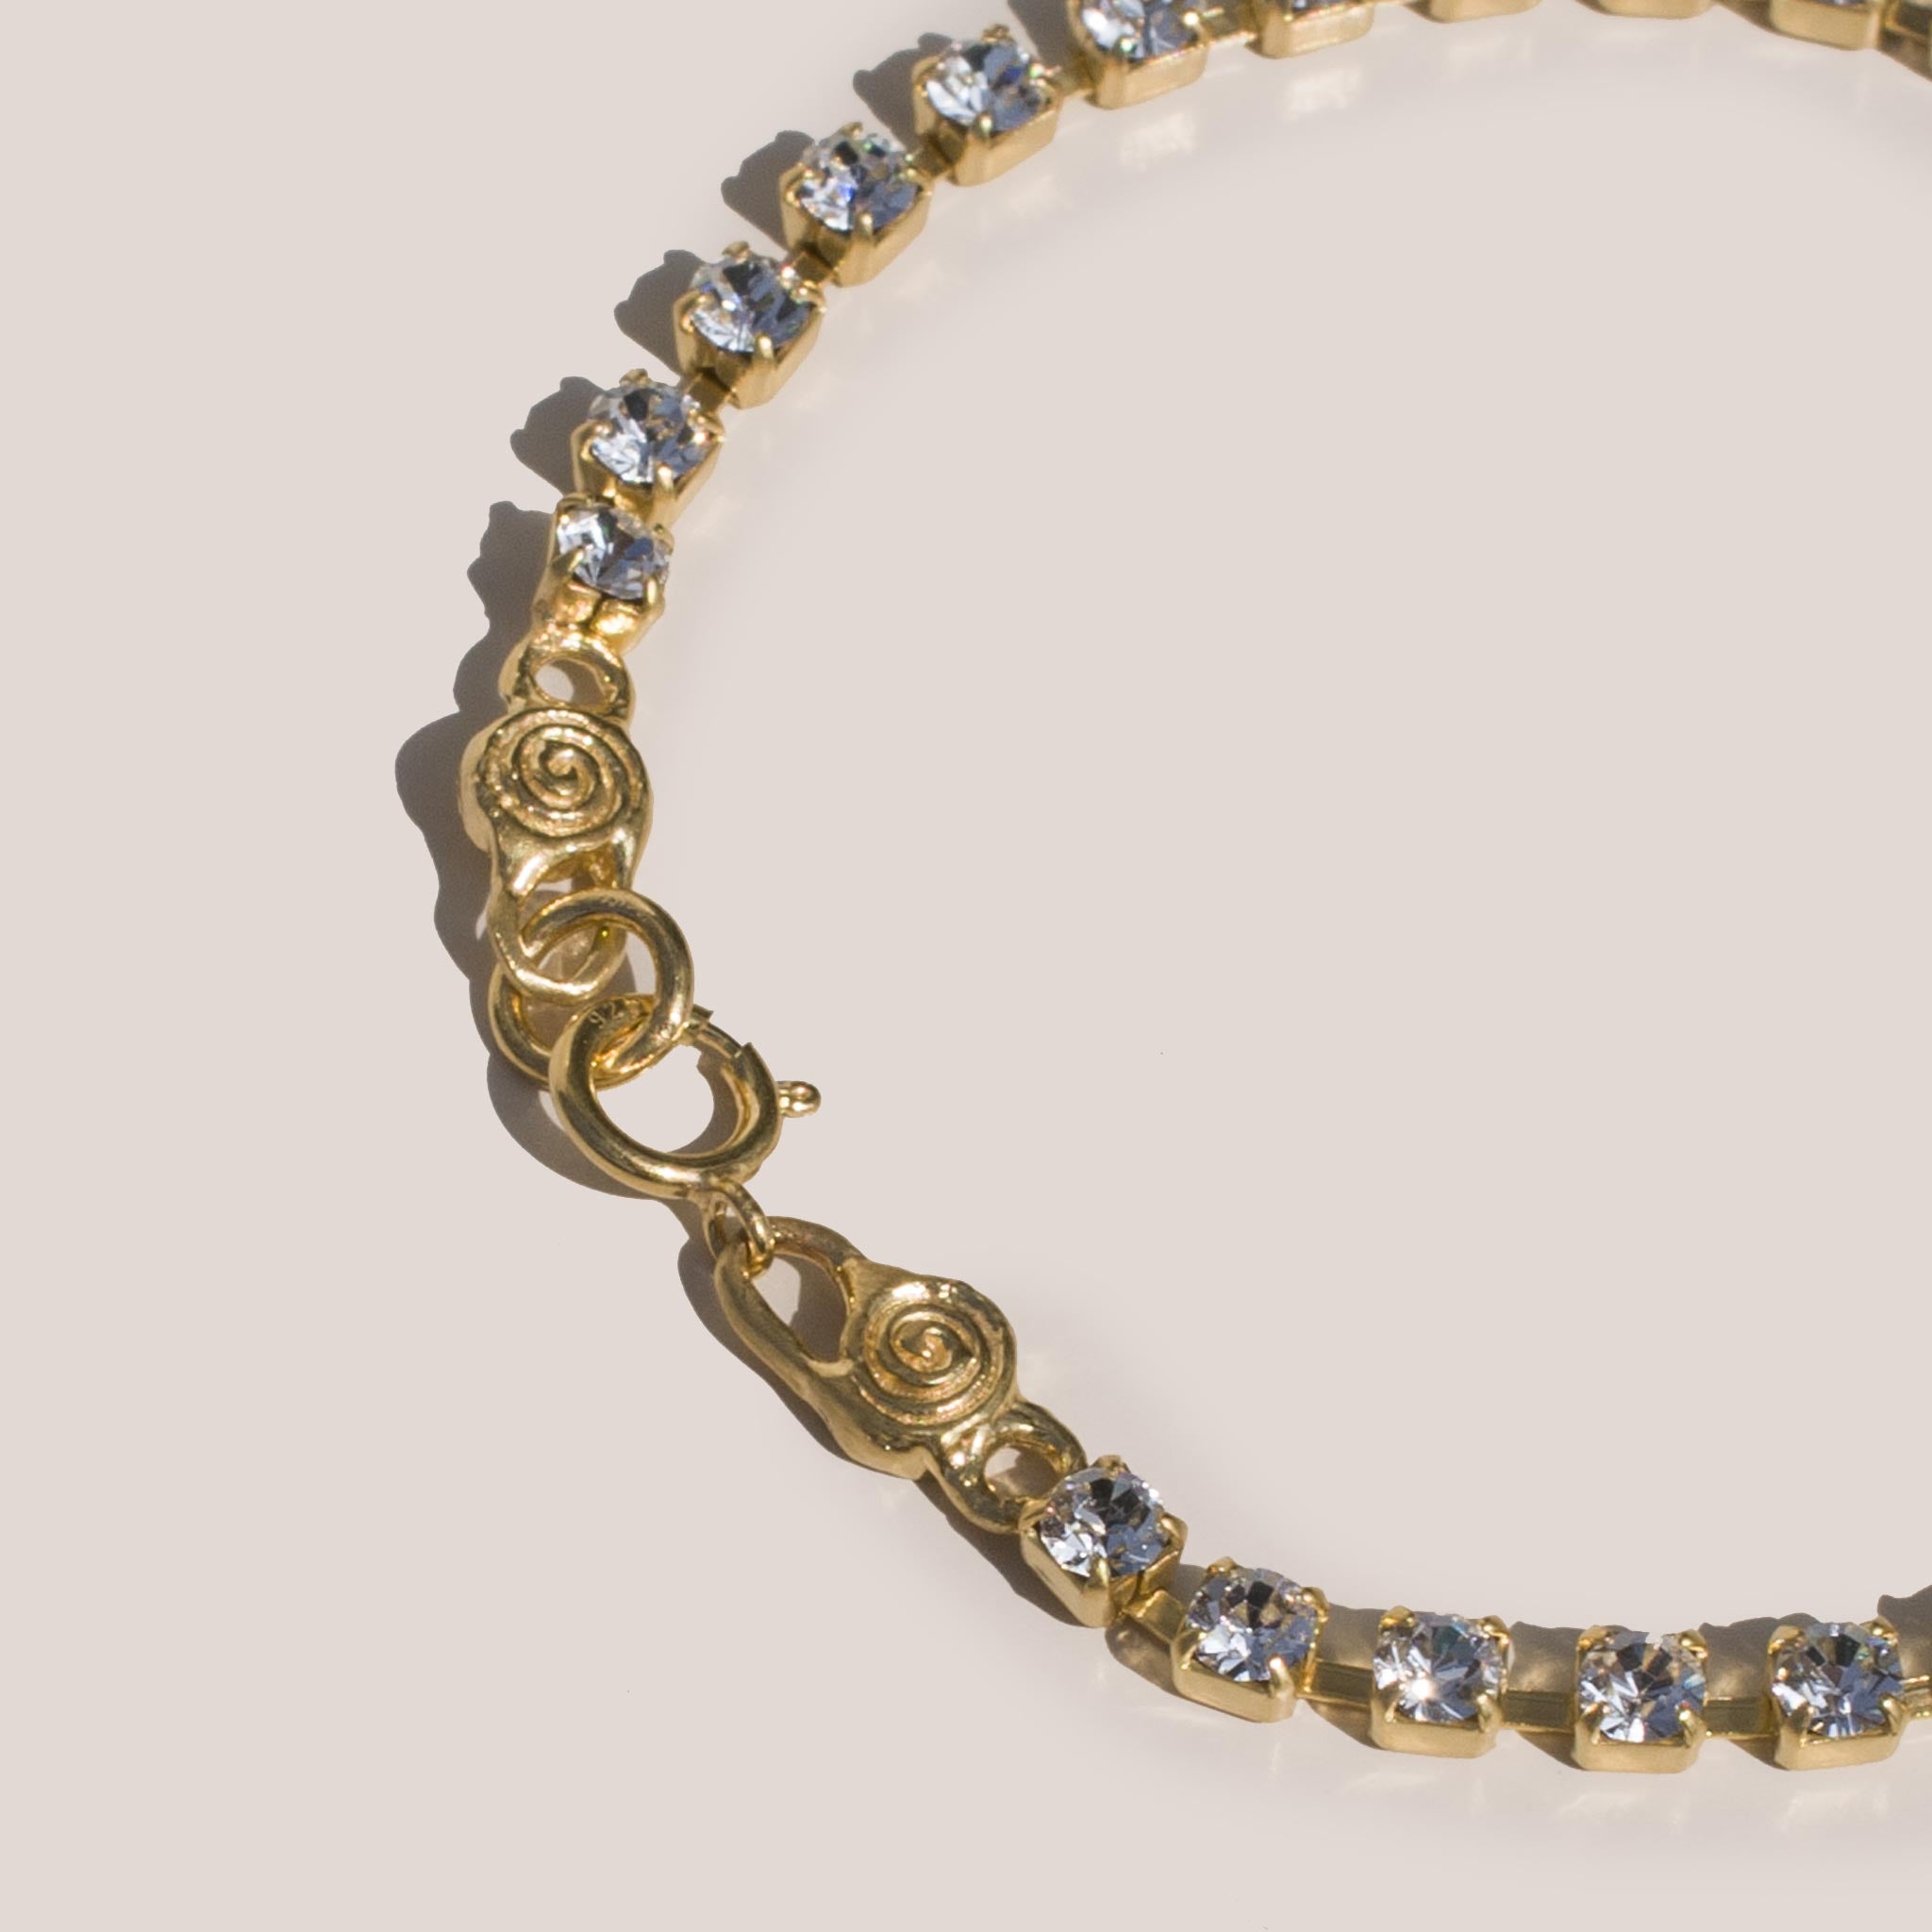 Mondo Mondo - Crystal Bracelet, detailed view of stones and closure, available at LCD.